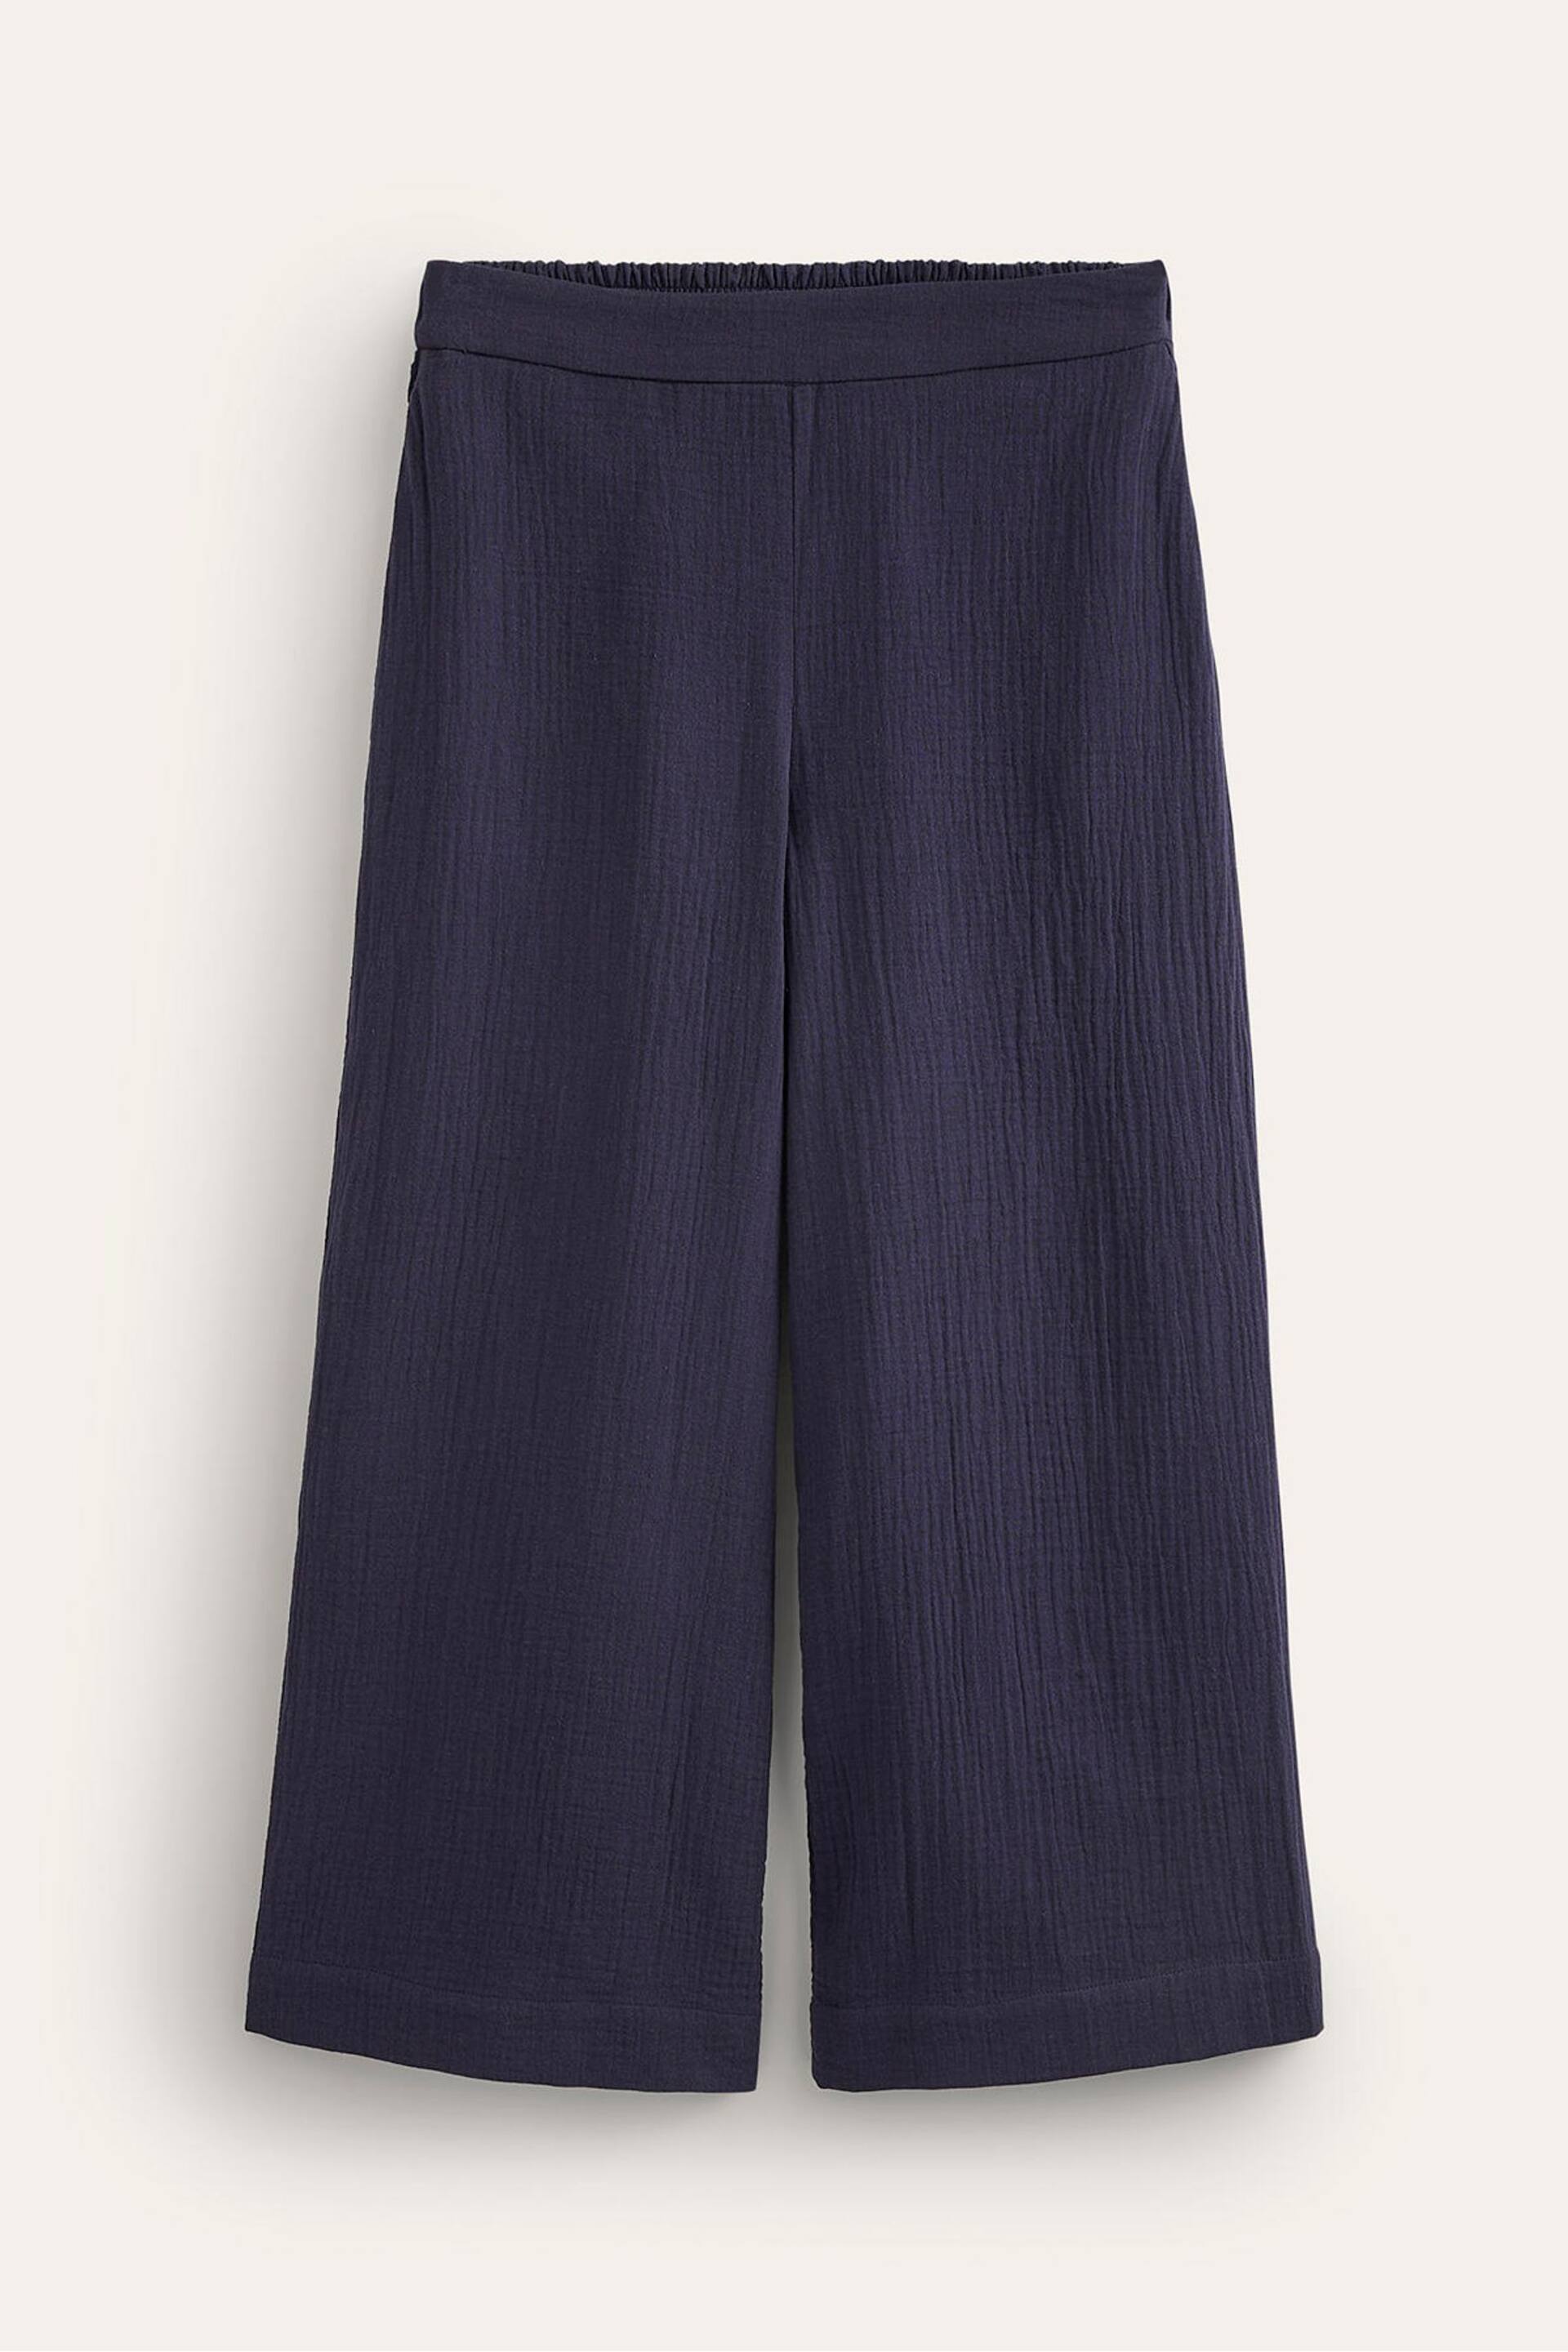 Boden Blue Pull-on Doublecloth Trousers - Image 5 of 5